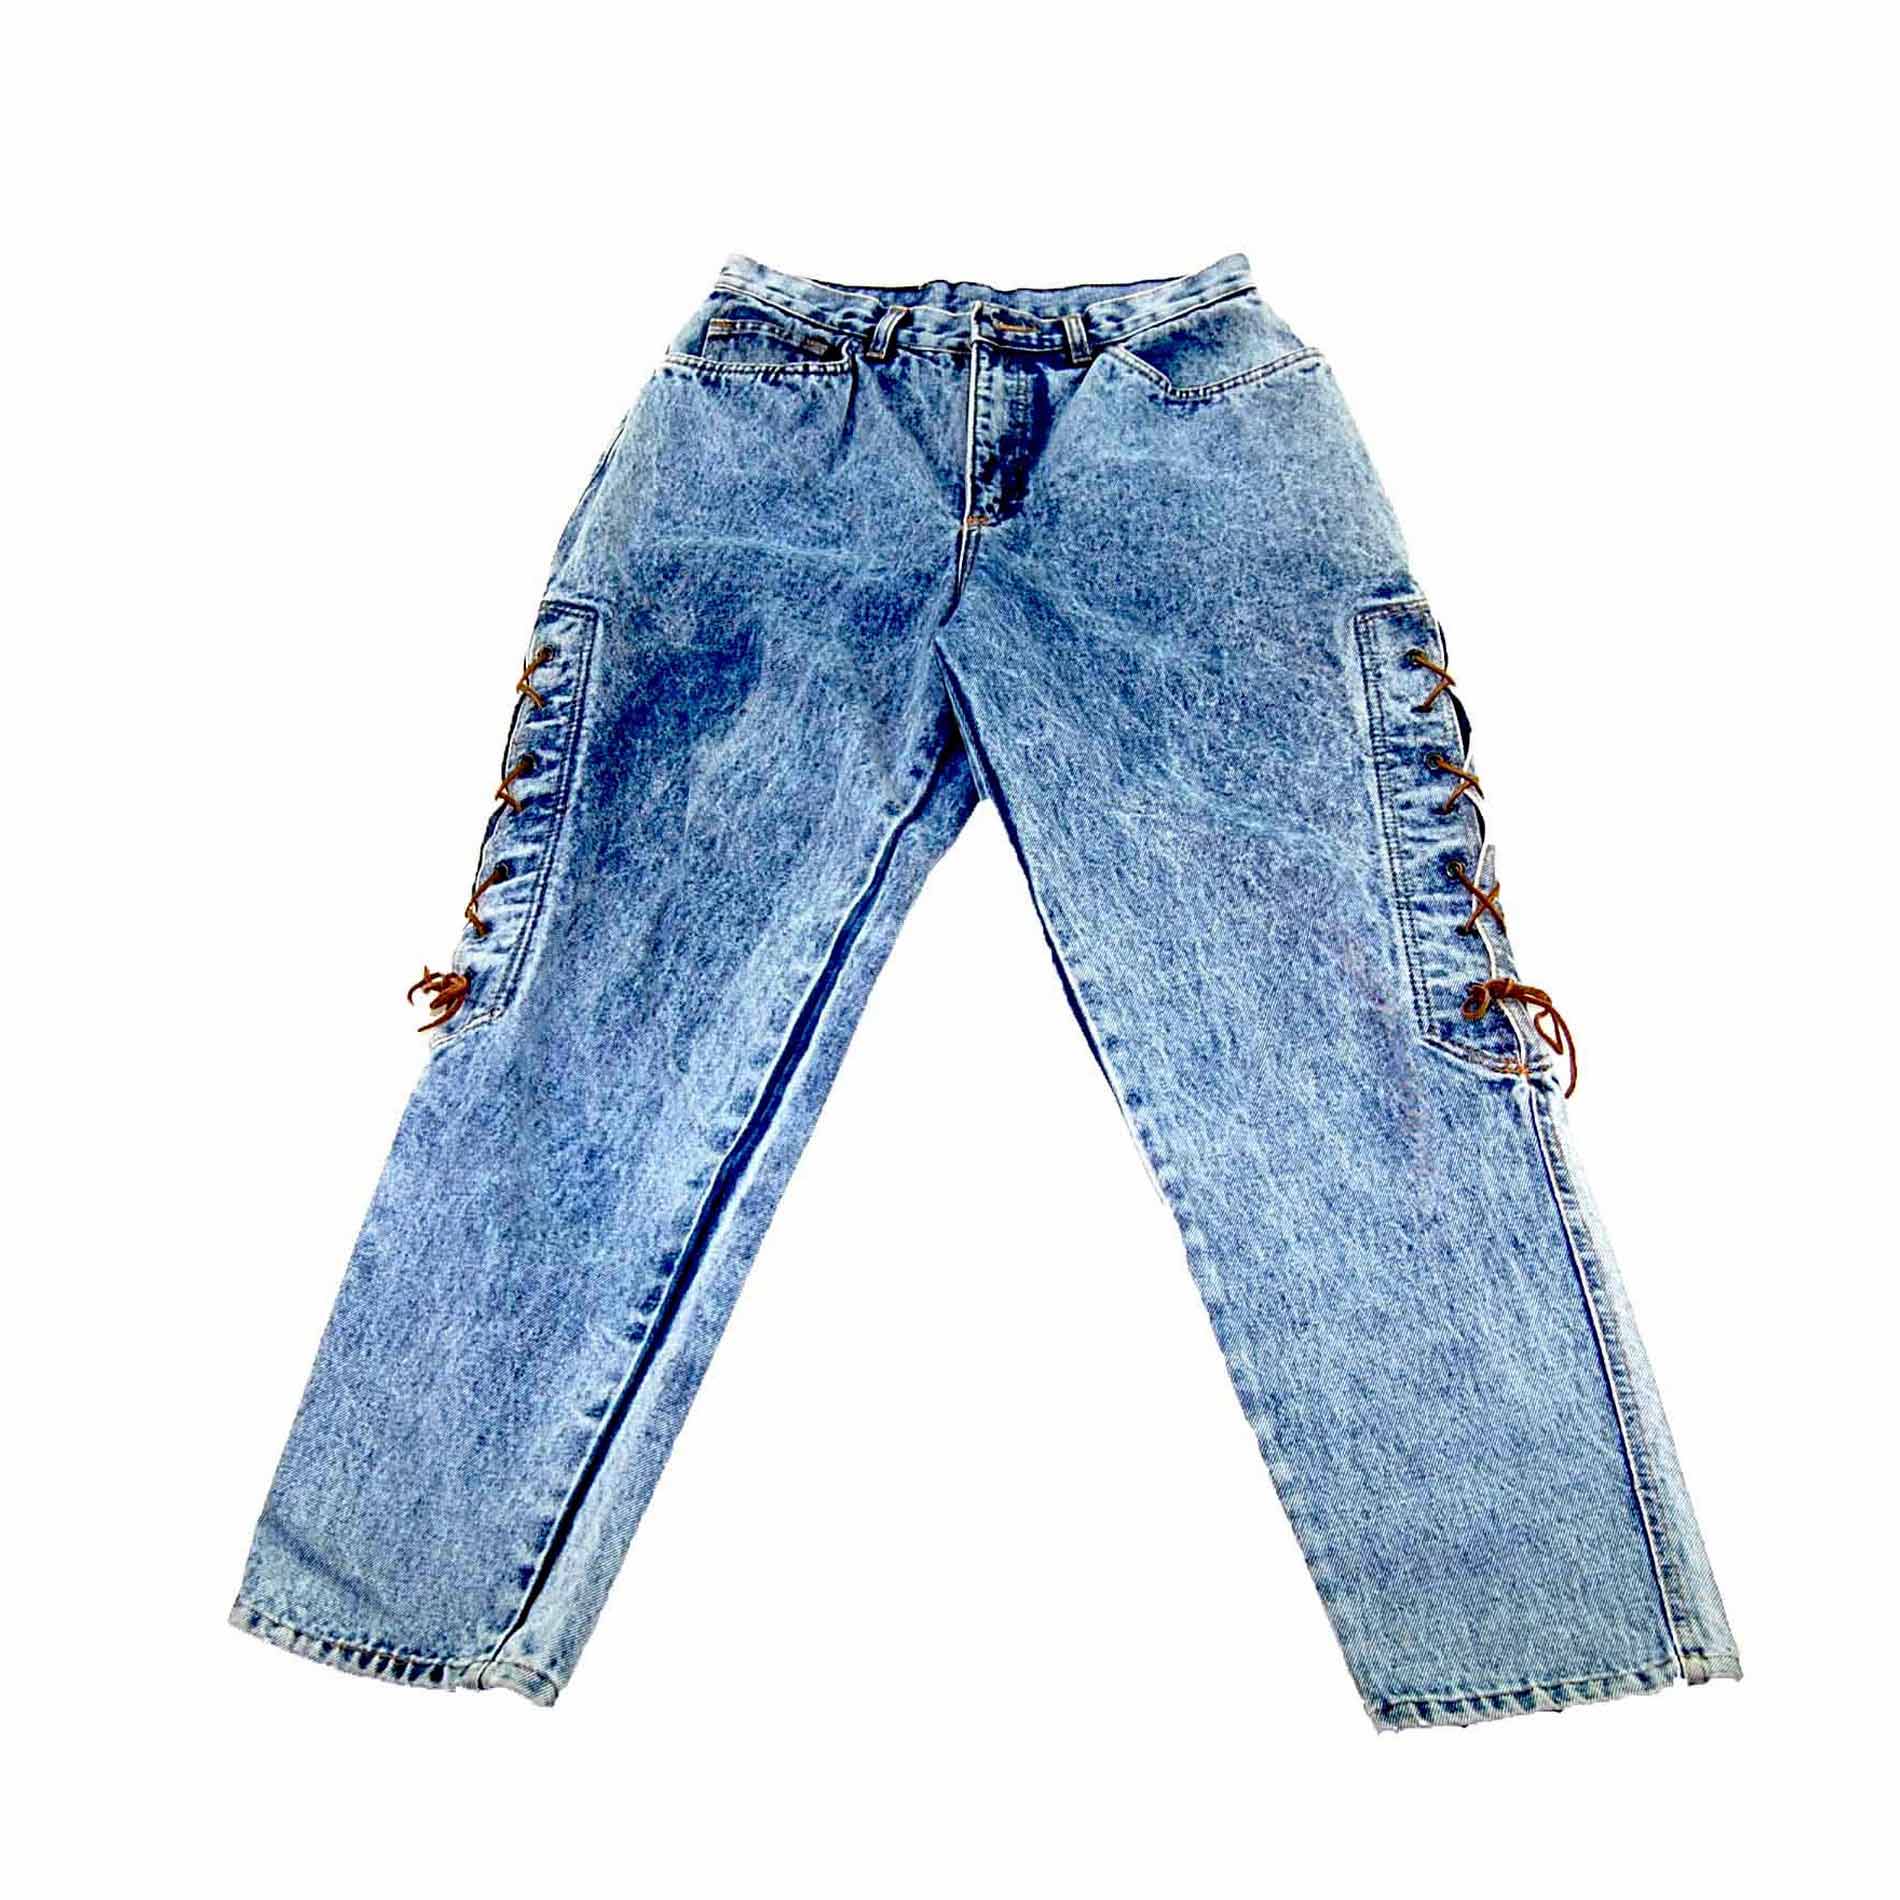 90s Lace up Acid Wash Mom Jeans - 10